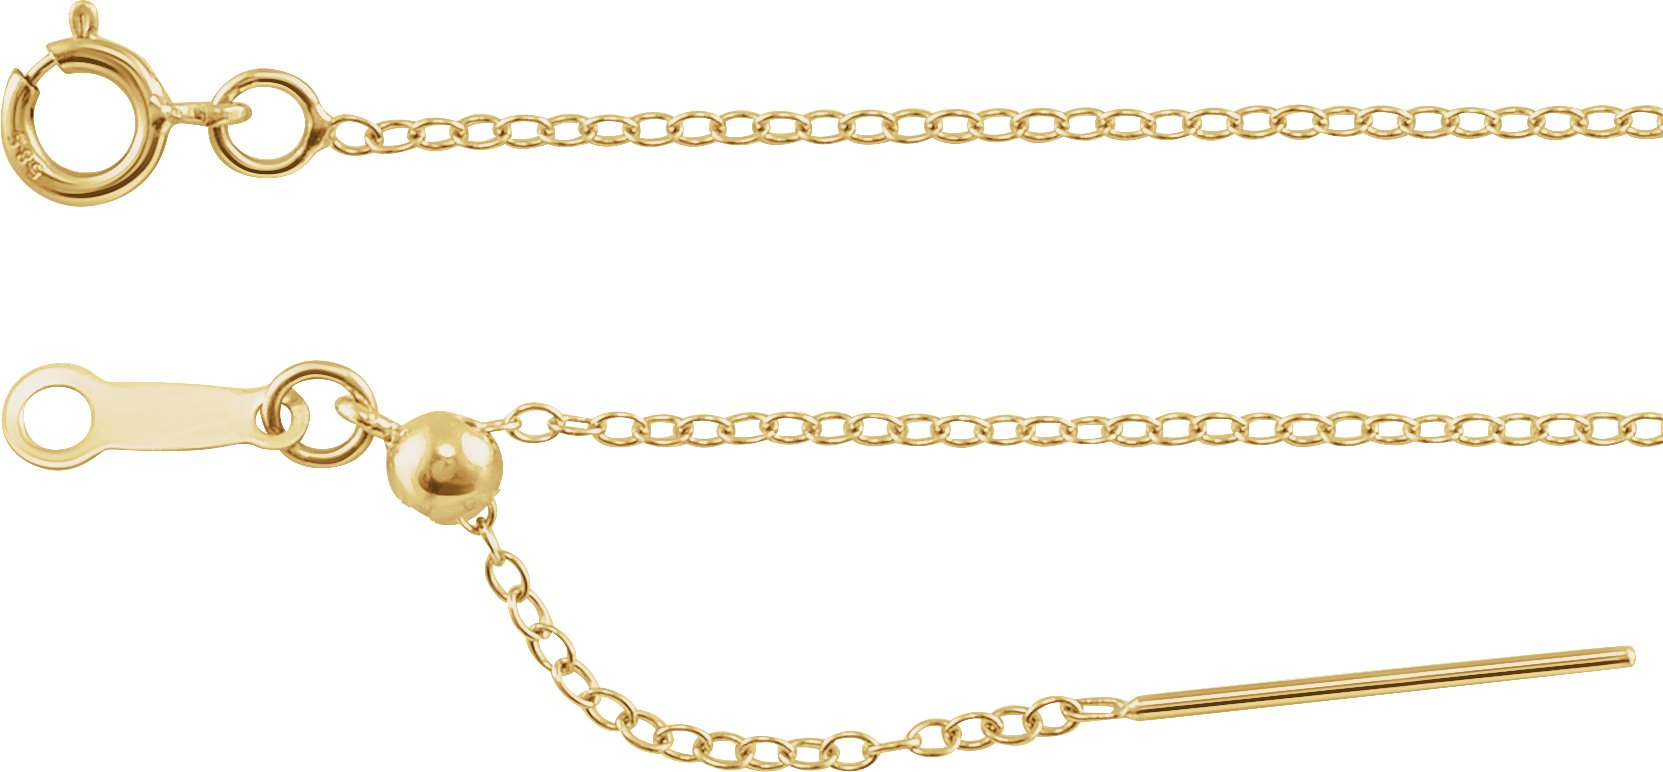 14K Yellow Gold-Filled 1.1 mm Adjustable Threader Cable 6-8" Chain 